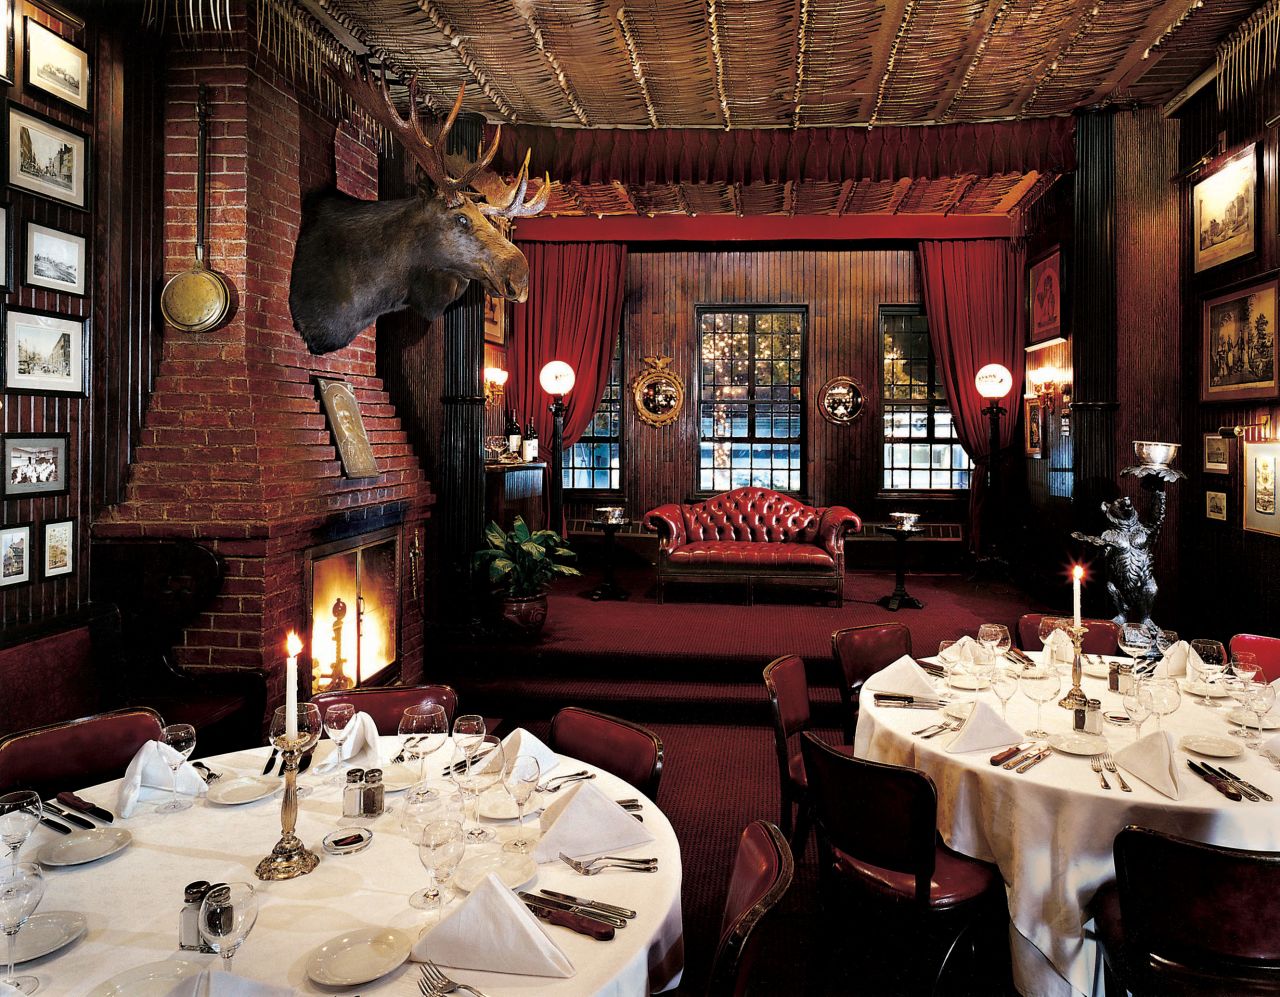 Albert Keen founded Keens Steakhouse in 1885 in what was then the Theater District, Herald Square.